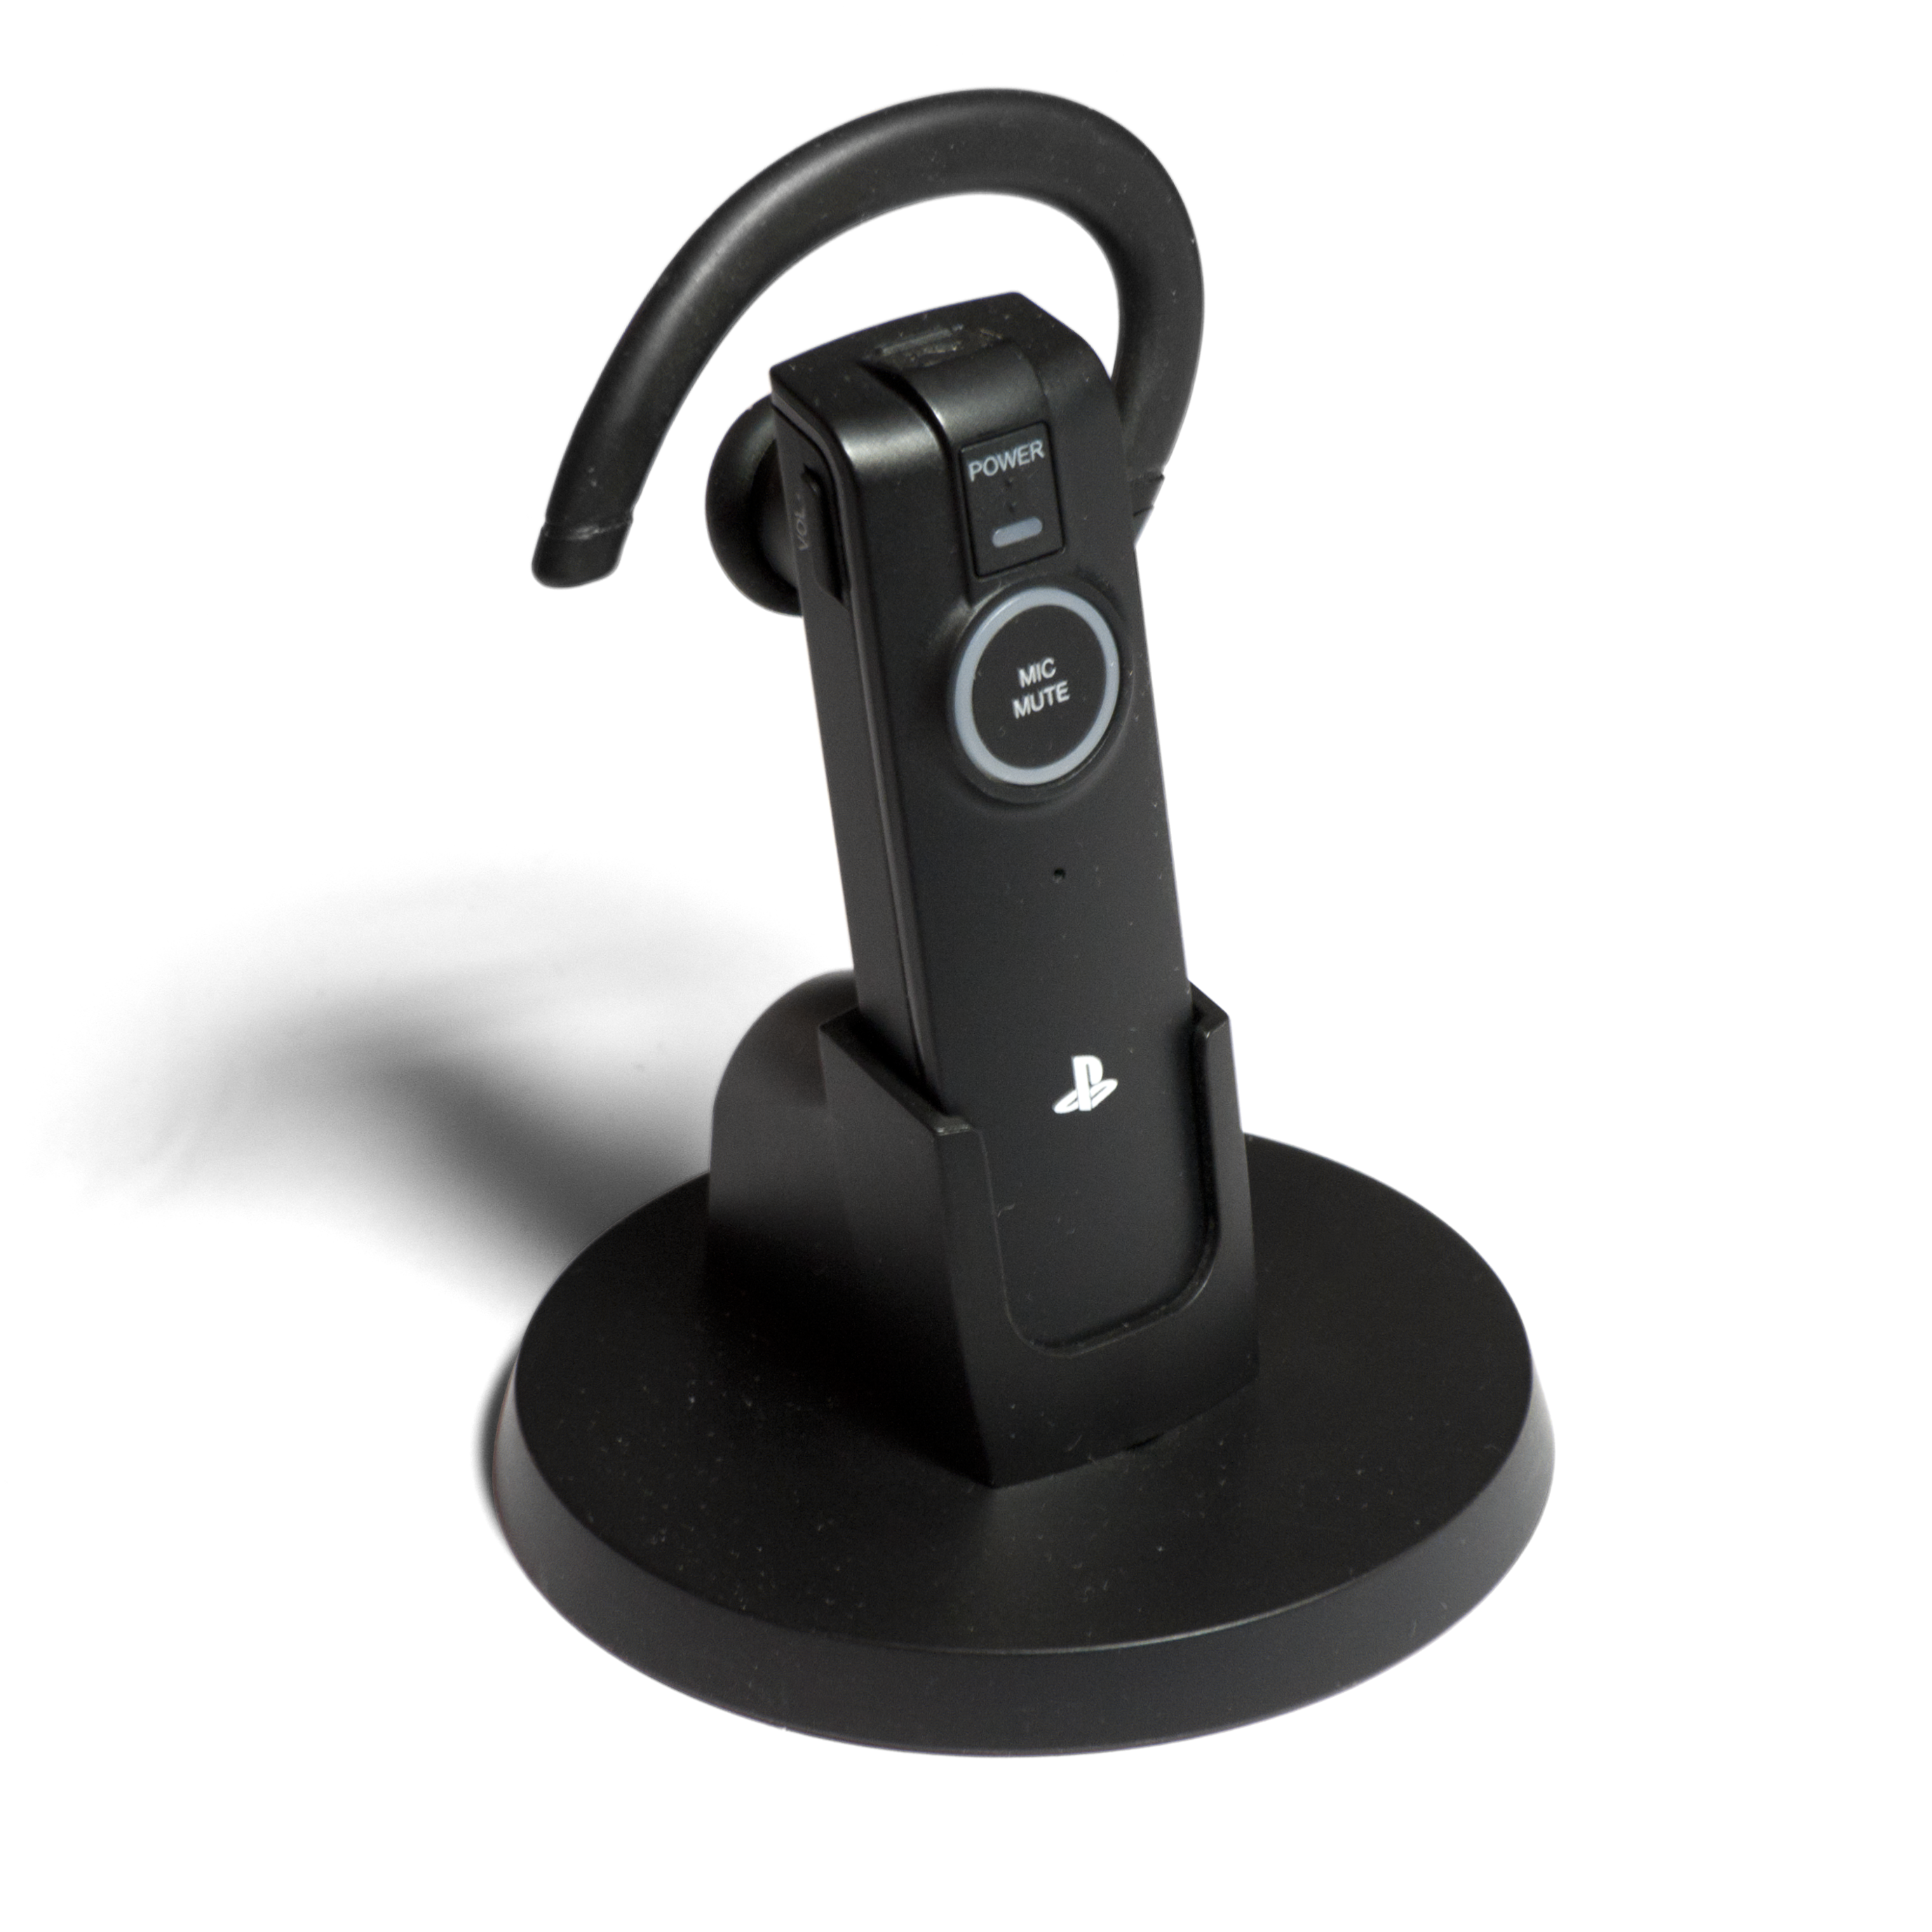 optocht Oven corruptie File:PlayStation 3 bluetooth headset.png - Wikimedia Commons